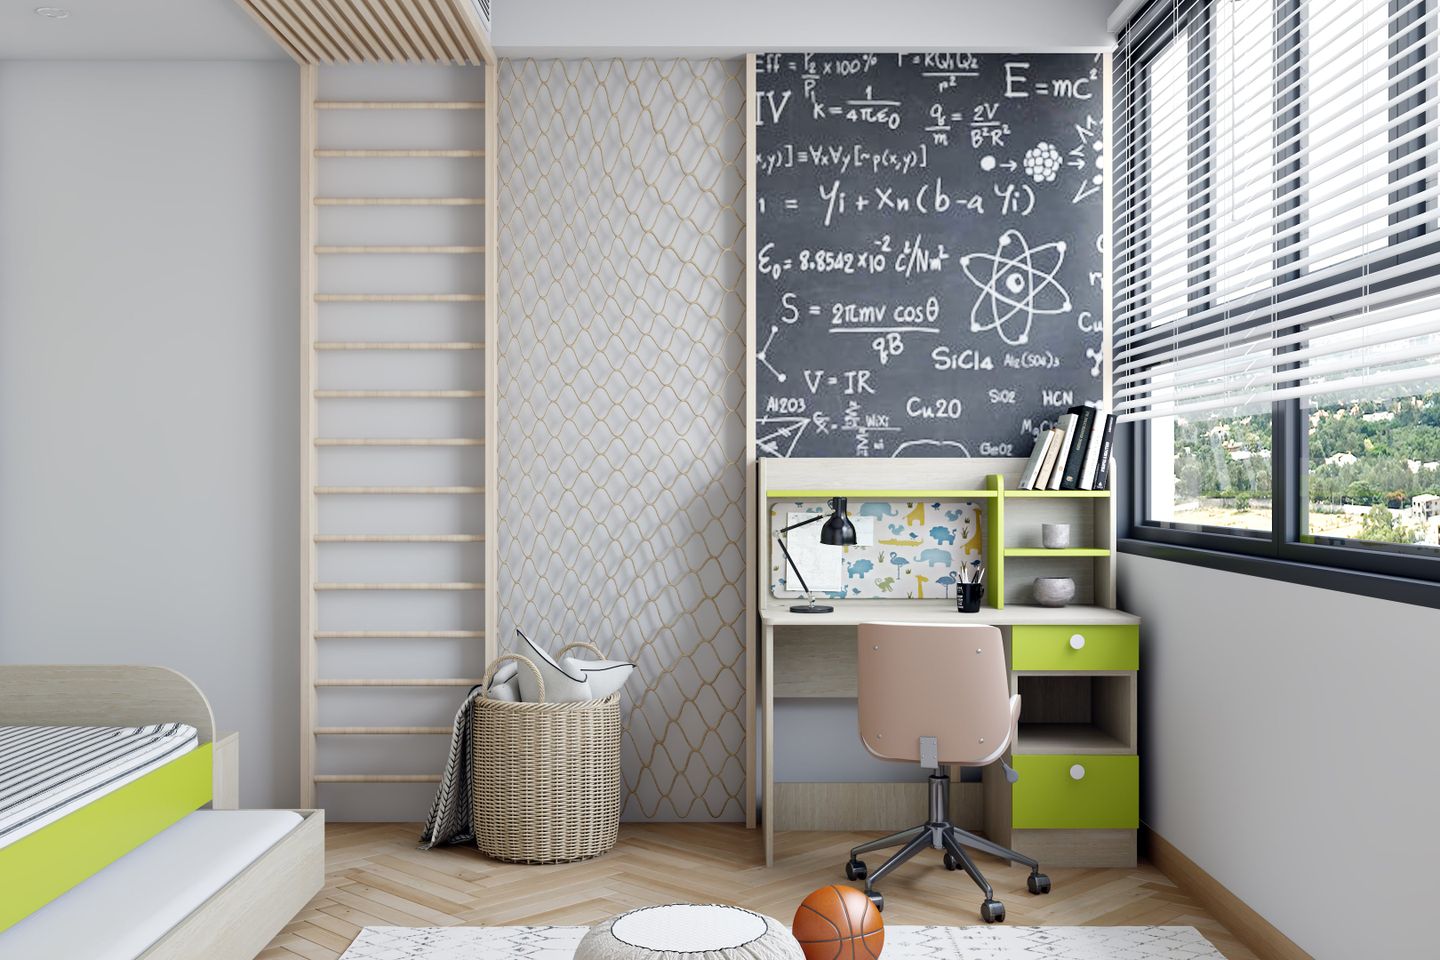 Modern Home Office With Study Table - Livspace